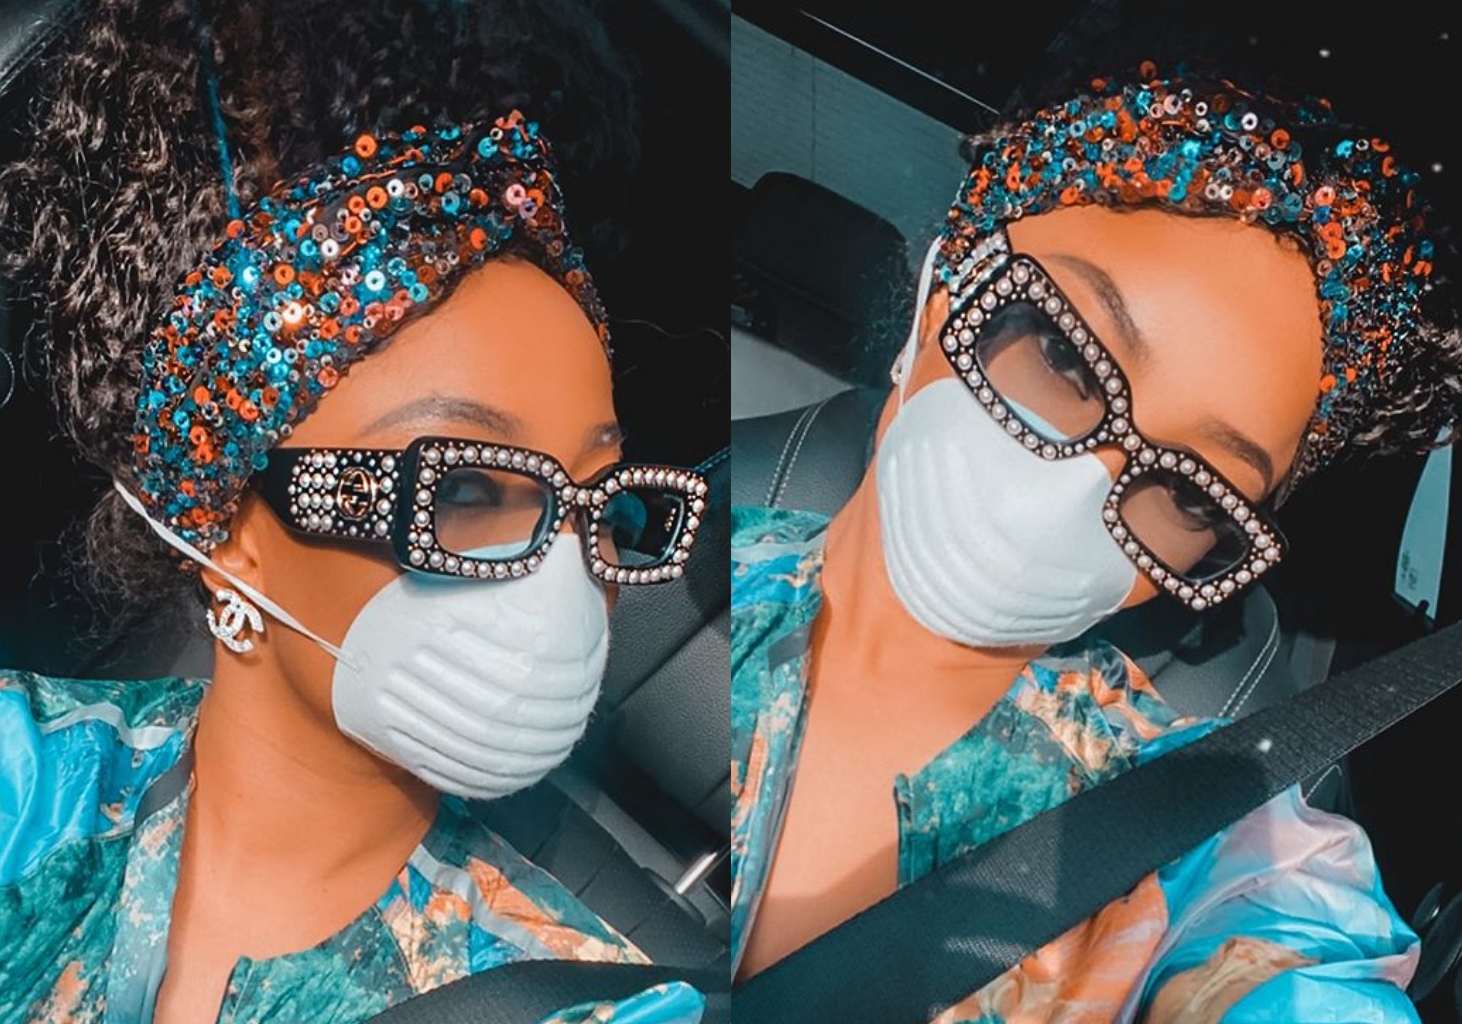 Toke Makinwa dish out new facemask fashion goals for fans (Photos)